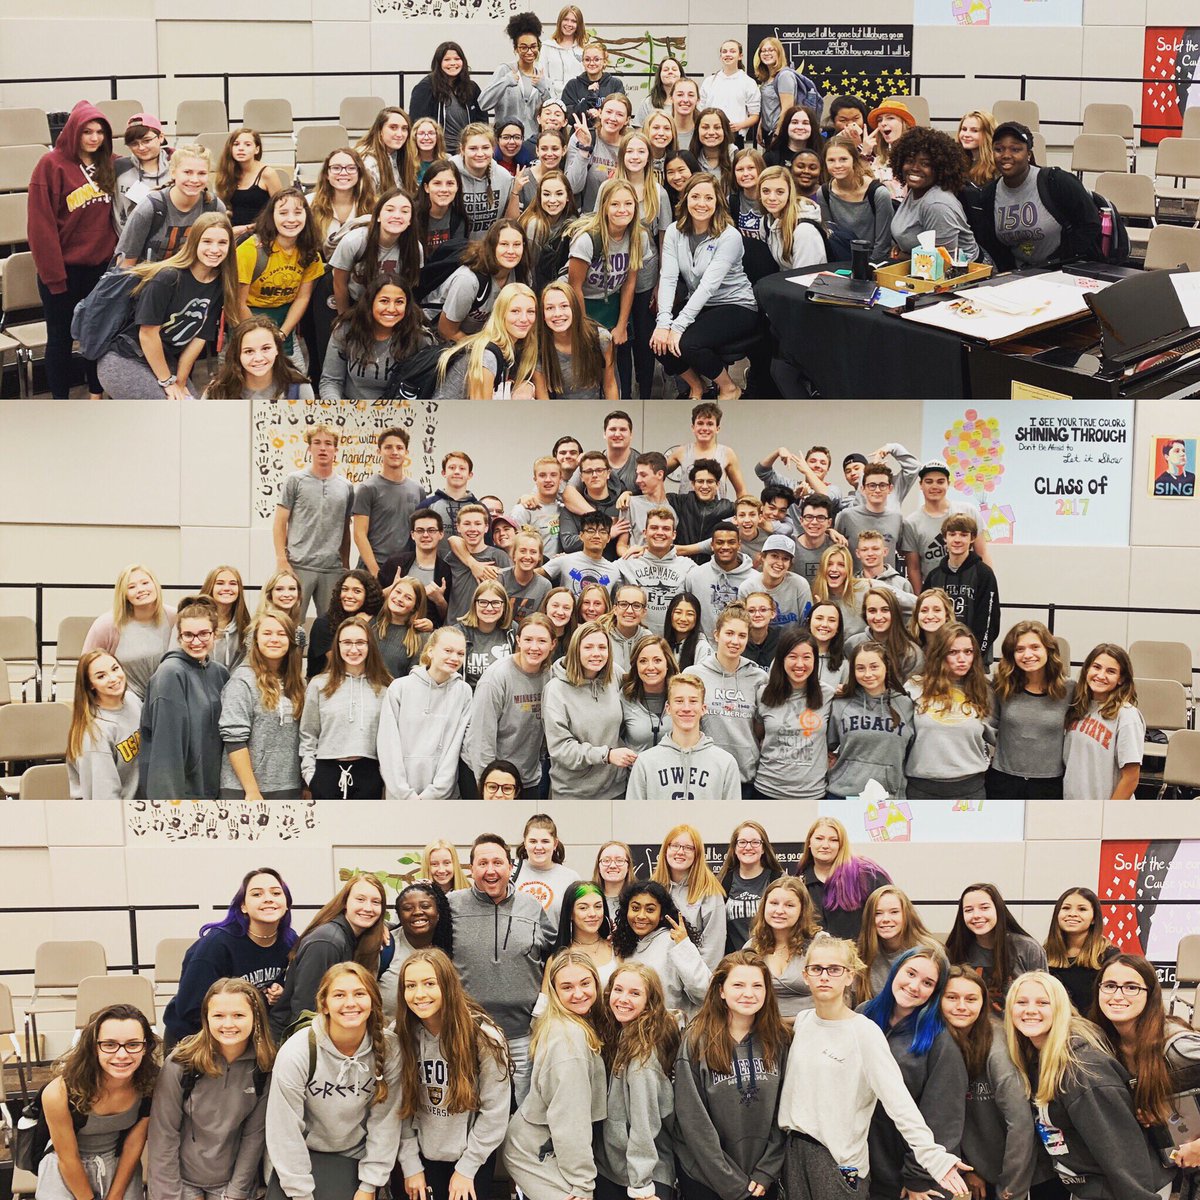 That’s a lot of gray! 🖤 Happy Groutfit Day and here’s to kicking off a great Homecoming week! #homecoming2019 #weare192 #choirculture #invest #trust #inspire #grow